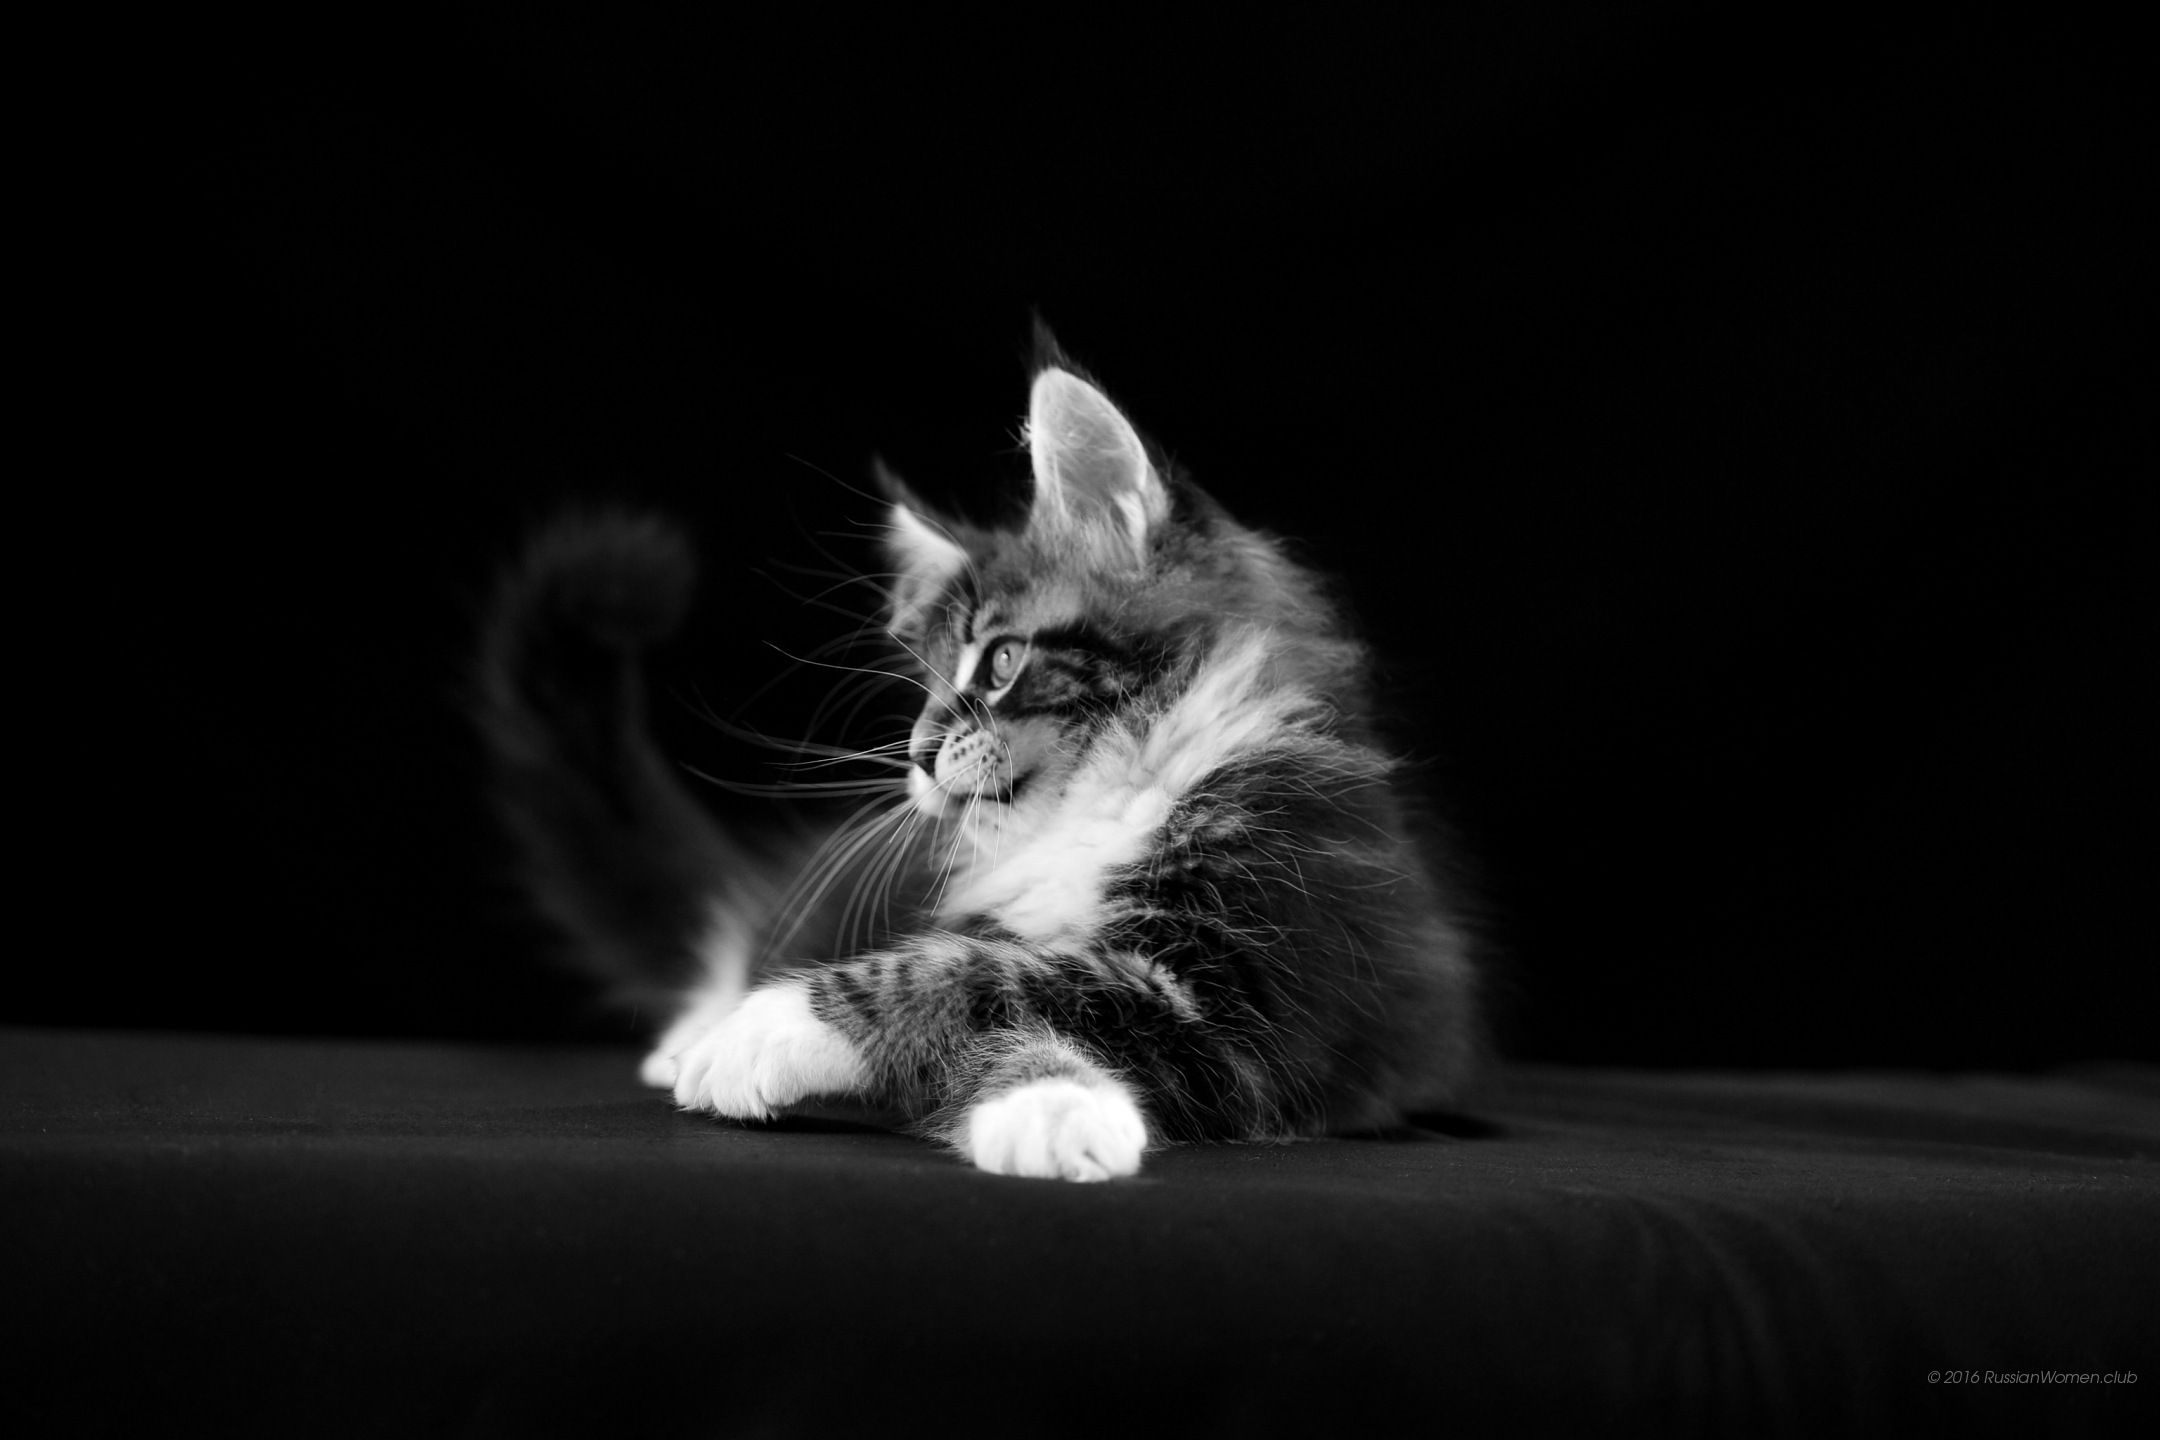 2160x1440 cat wallpaper. Photo backgrounds free